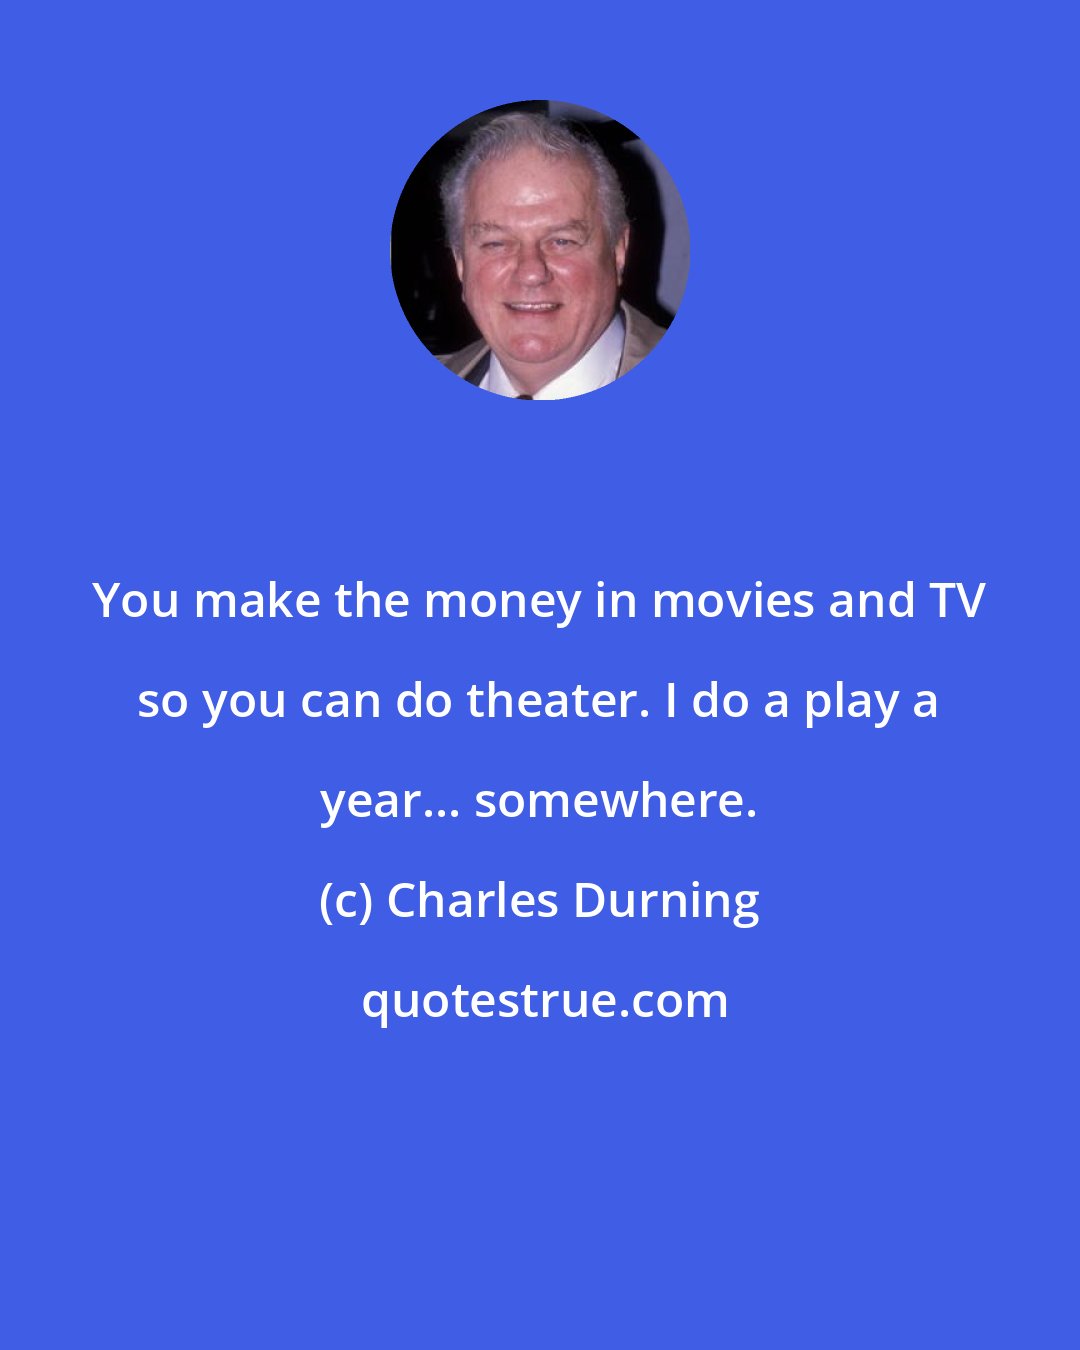 Charles Durning: You make the money in movies and TV so you can do theater. I do a play a year... somewhere.